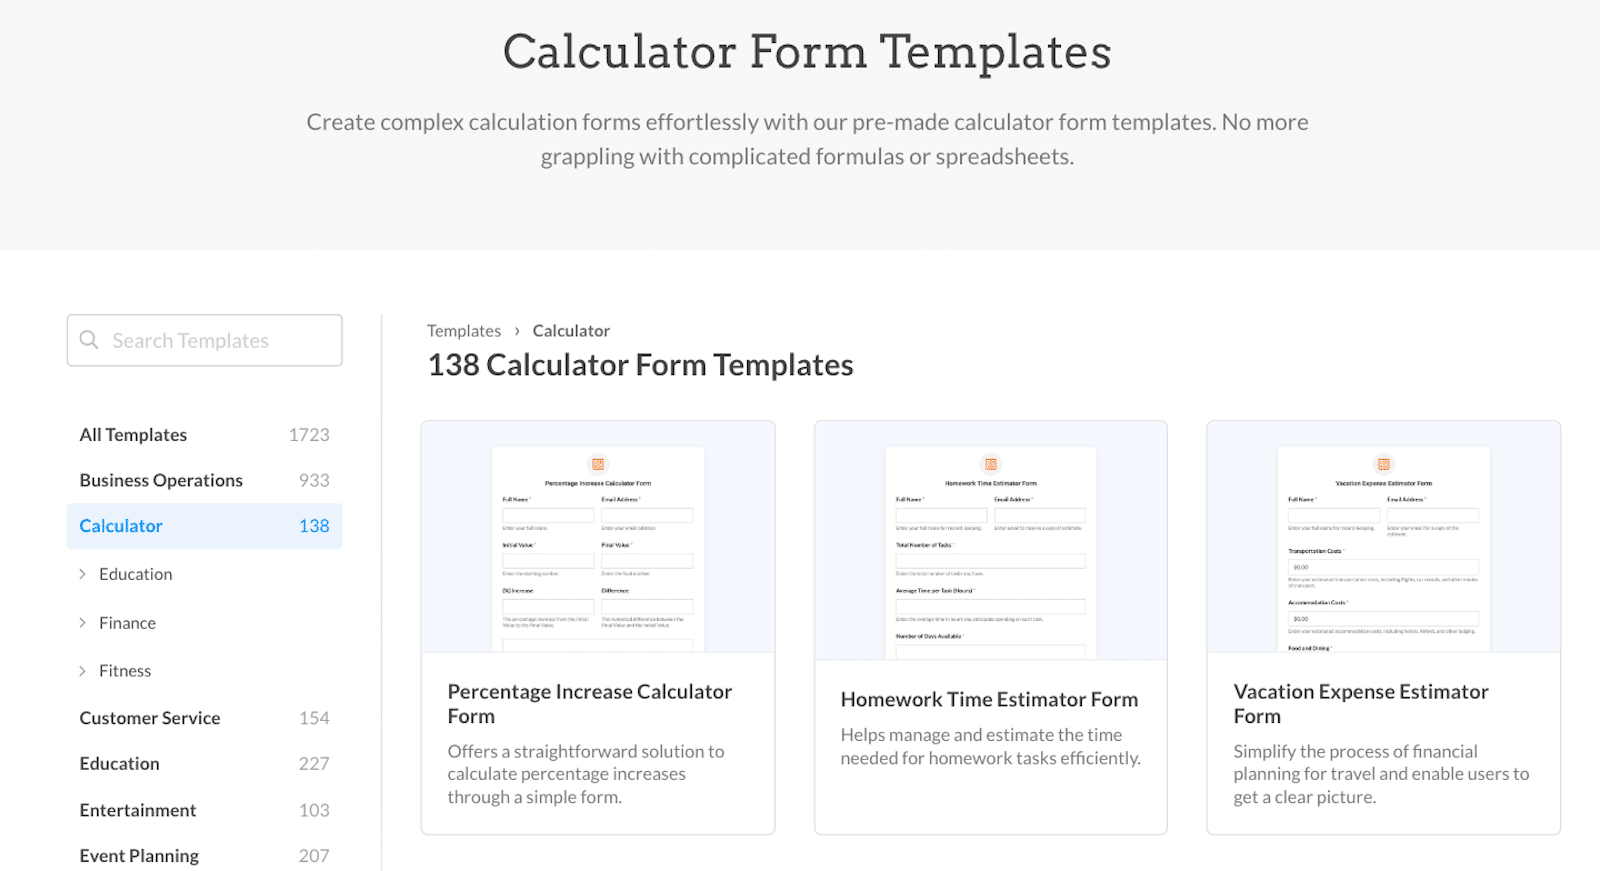 Viewing the calculator form templates from WPForms